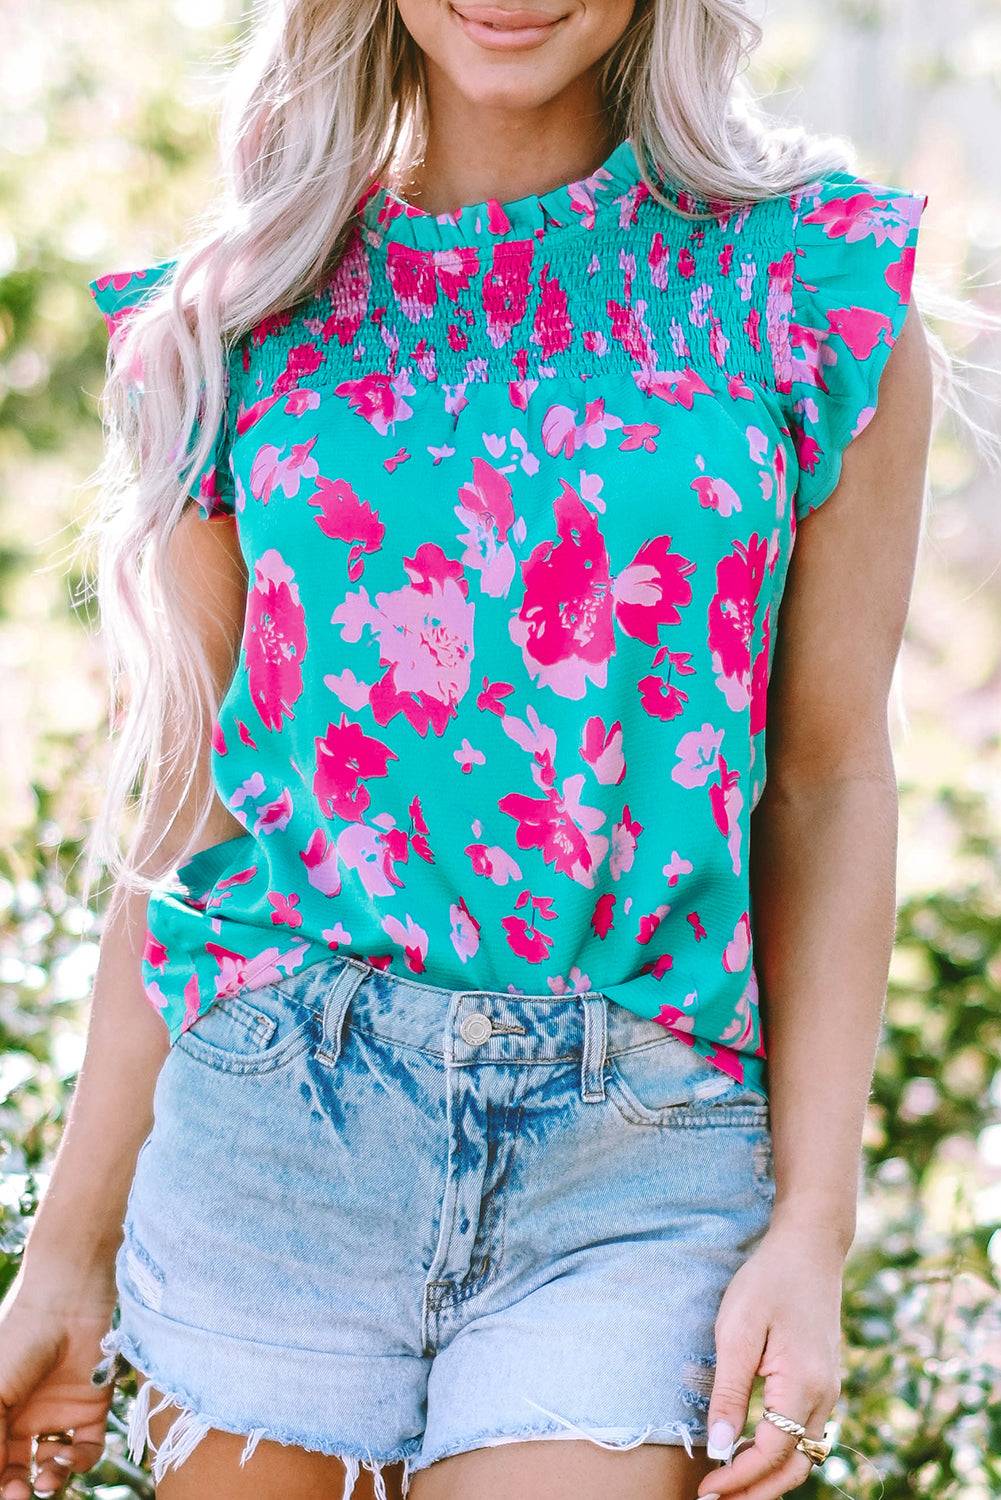 a woman with blonde hair wearing a floral top